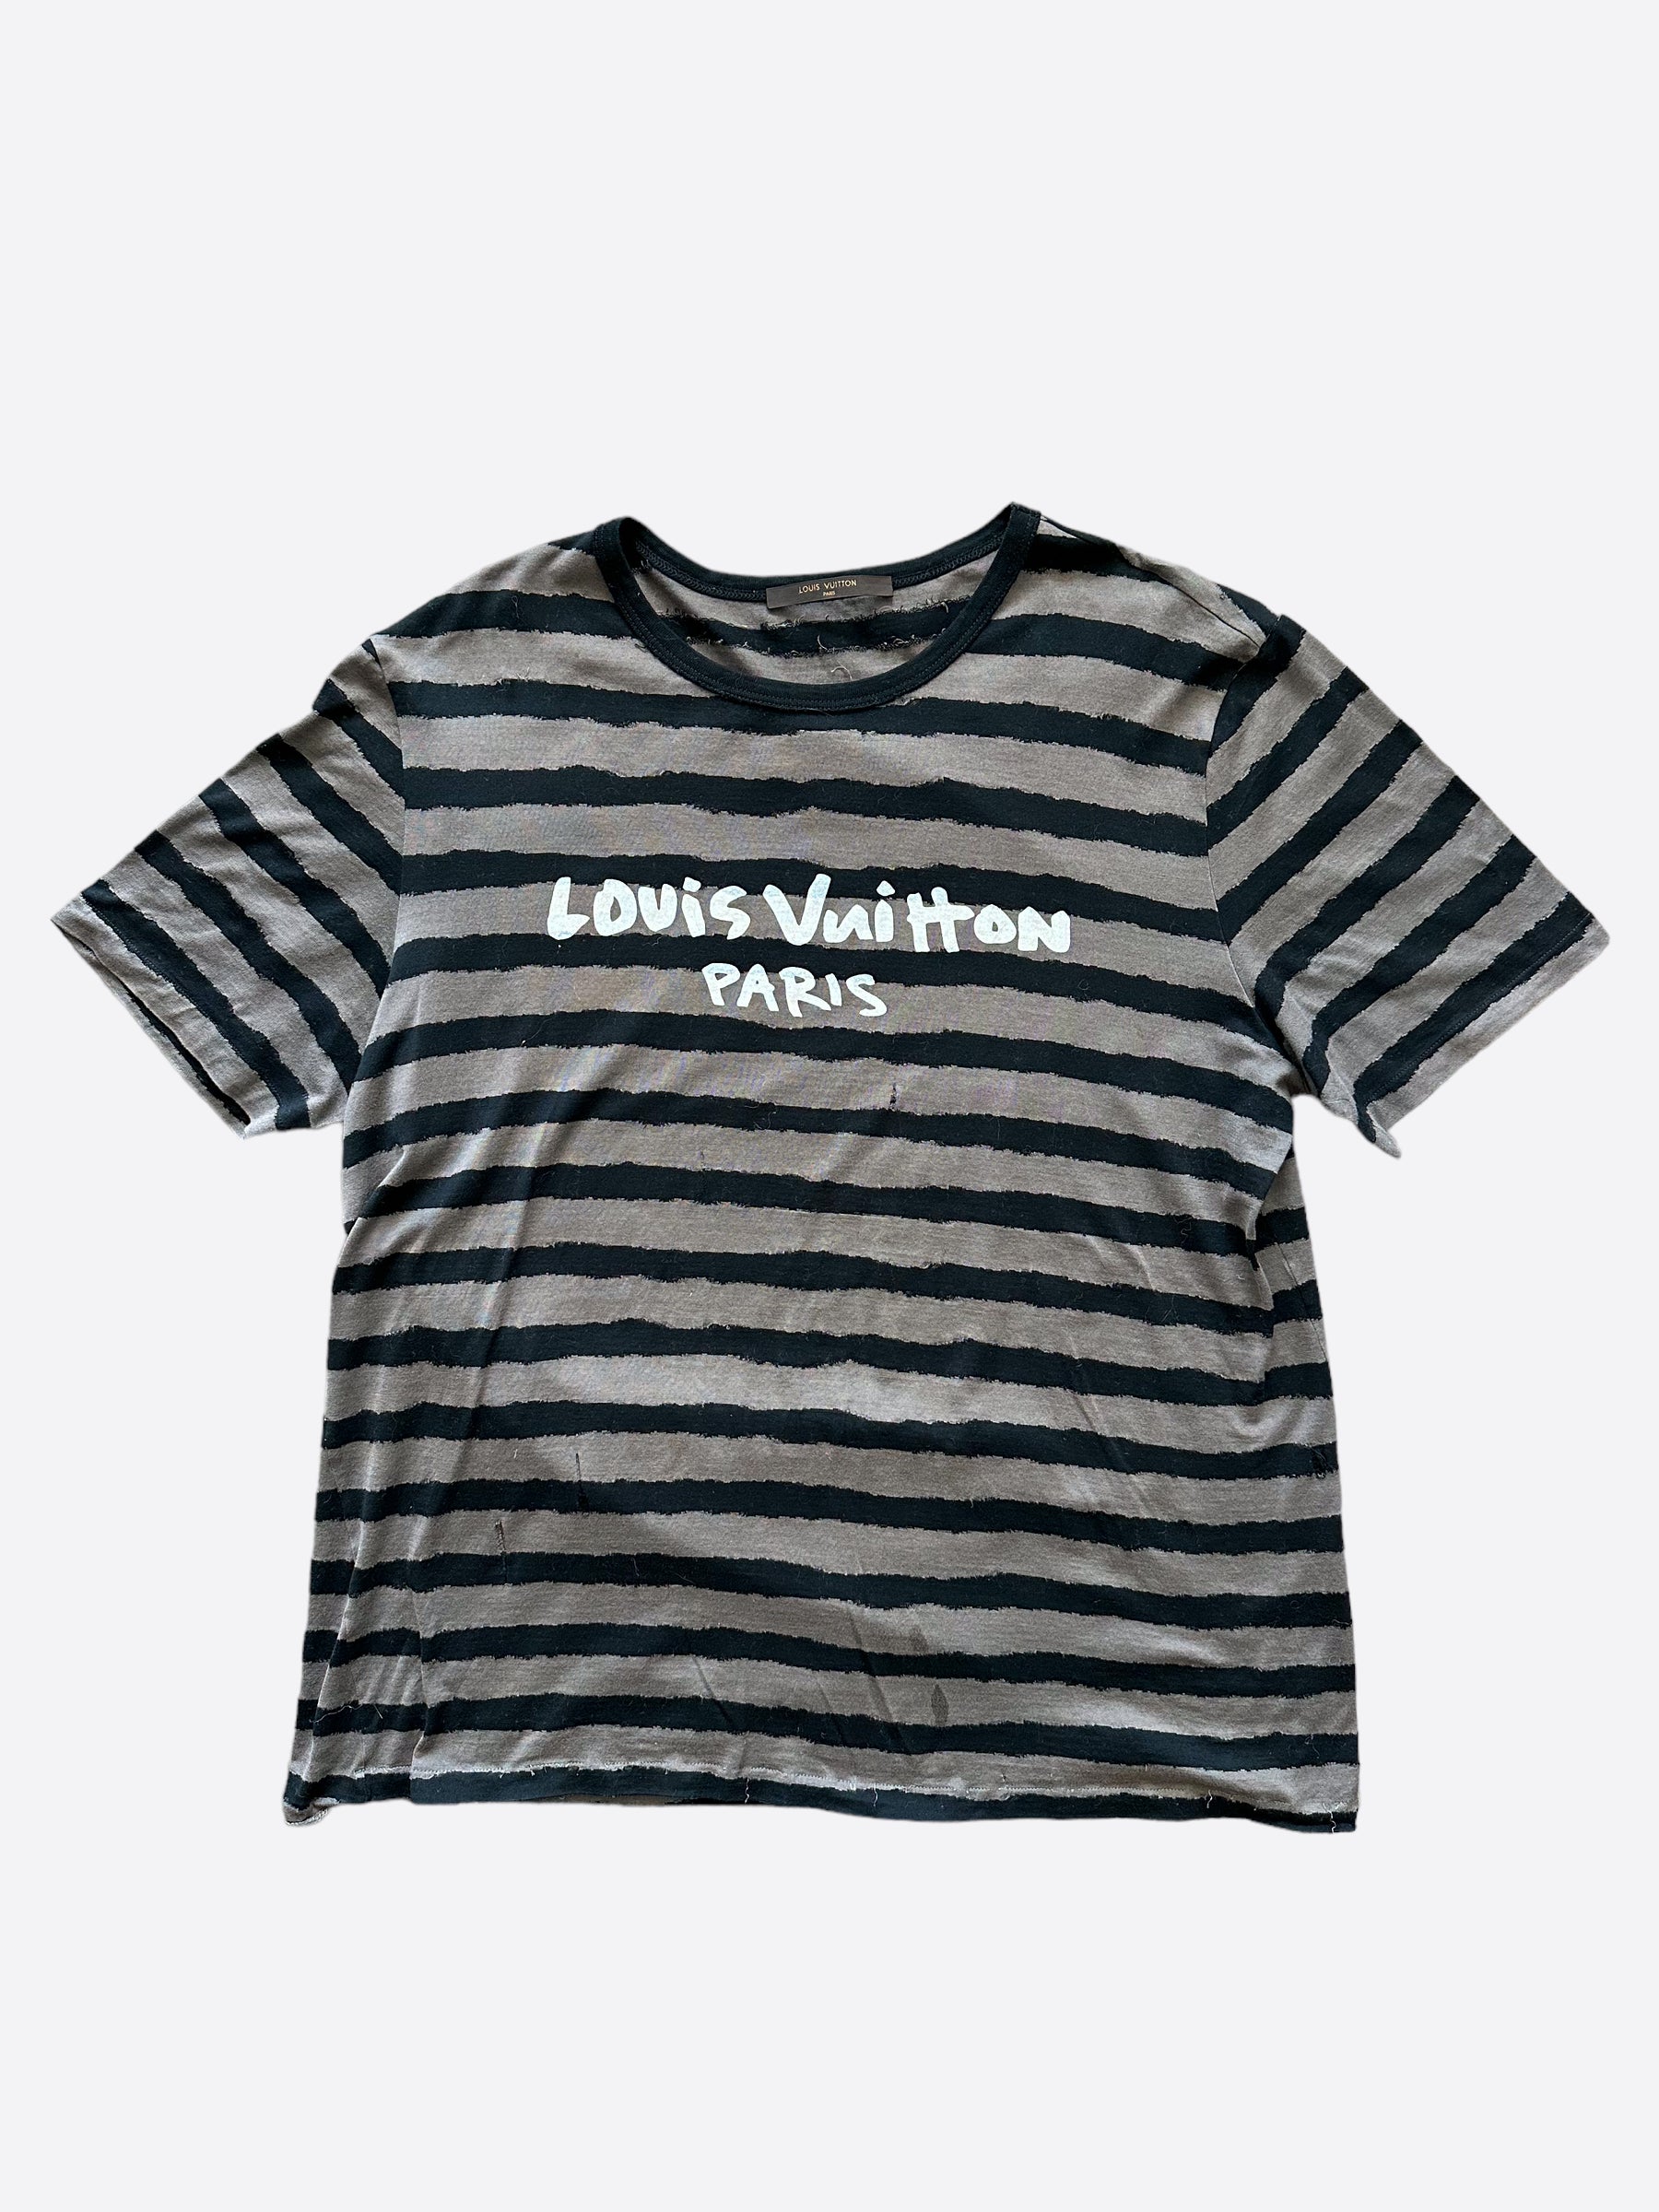 Louis Vuitton Stephen Sprouse Striped T-Shirt – Savonches